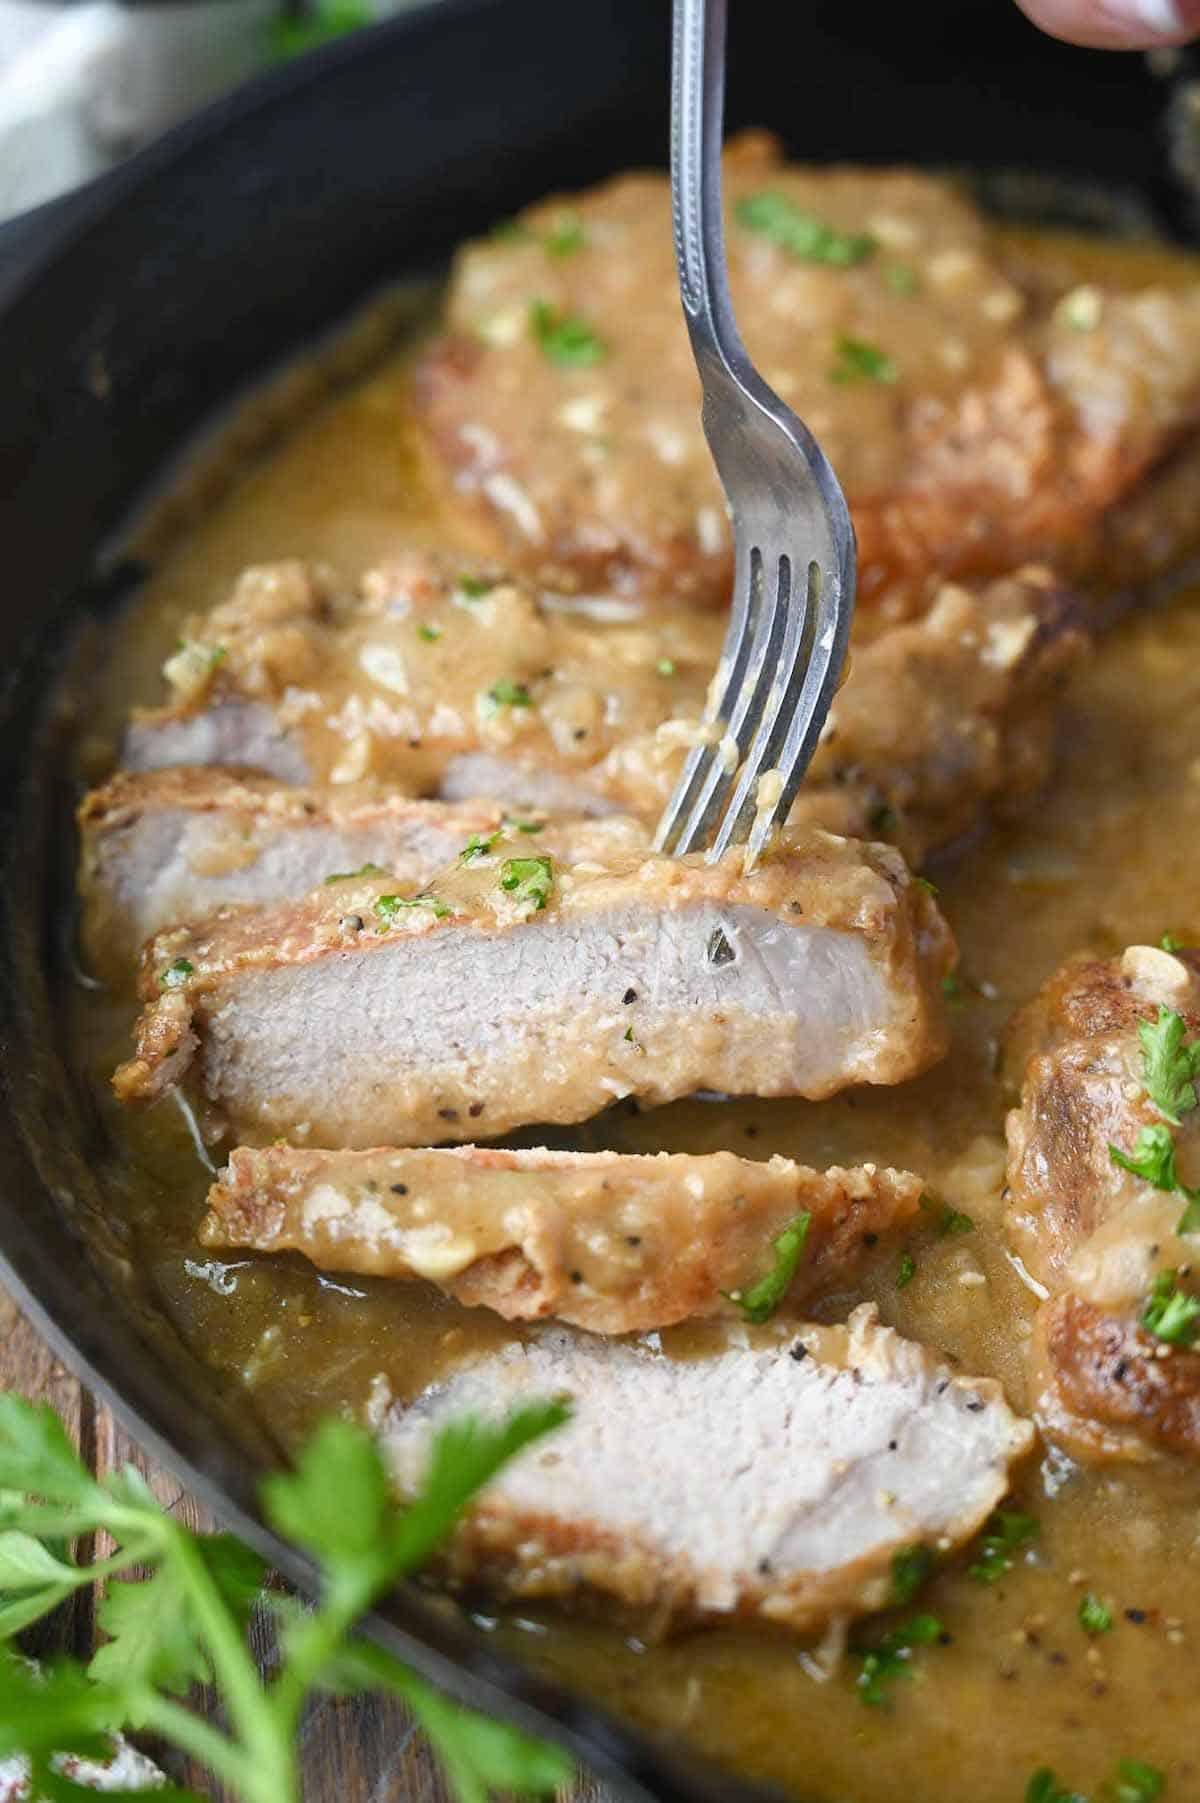 Smothered pork chops in a skillet sliced and a fork pickinh up a bite.